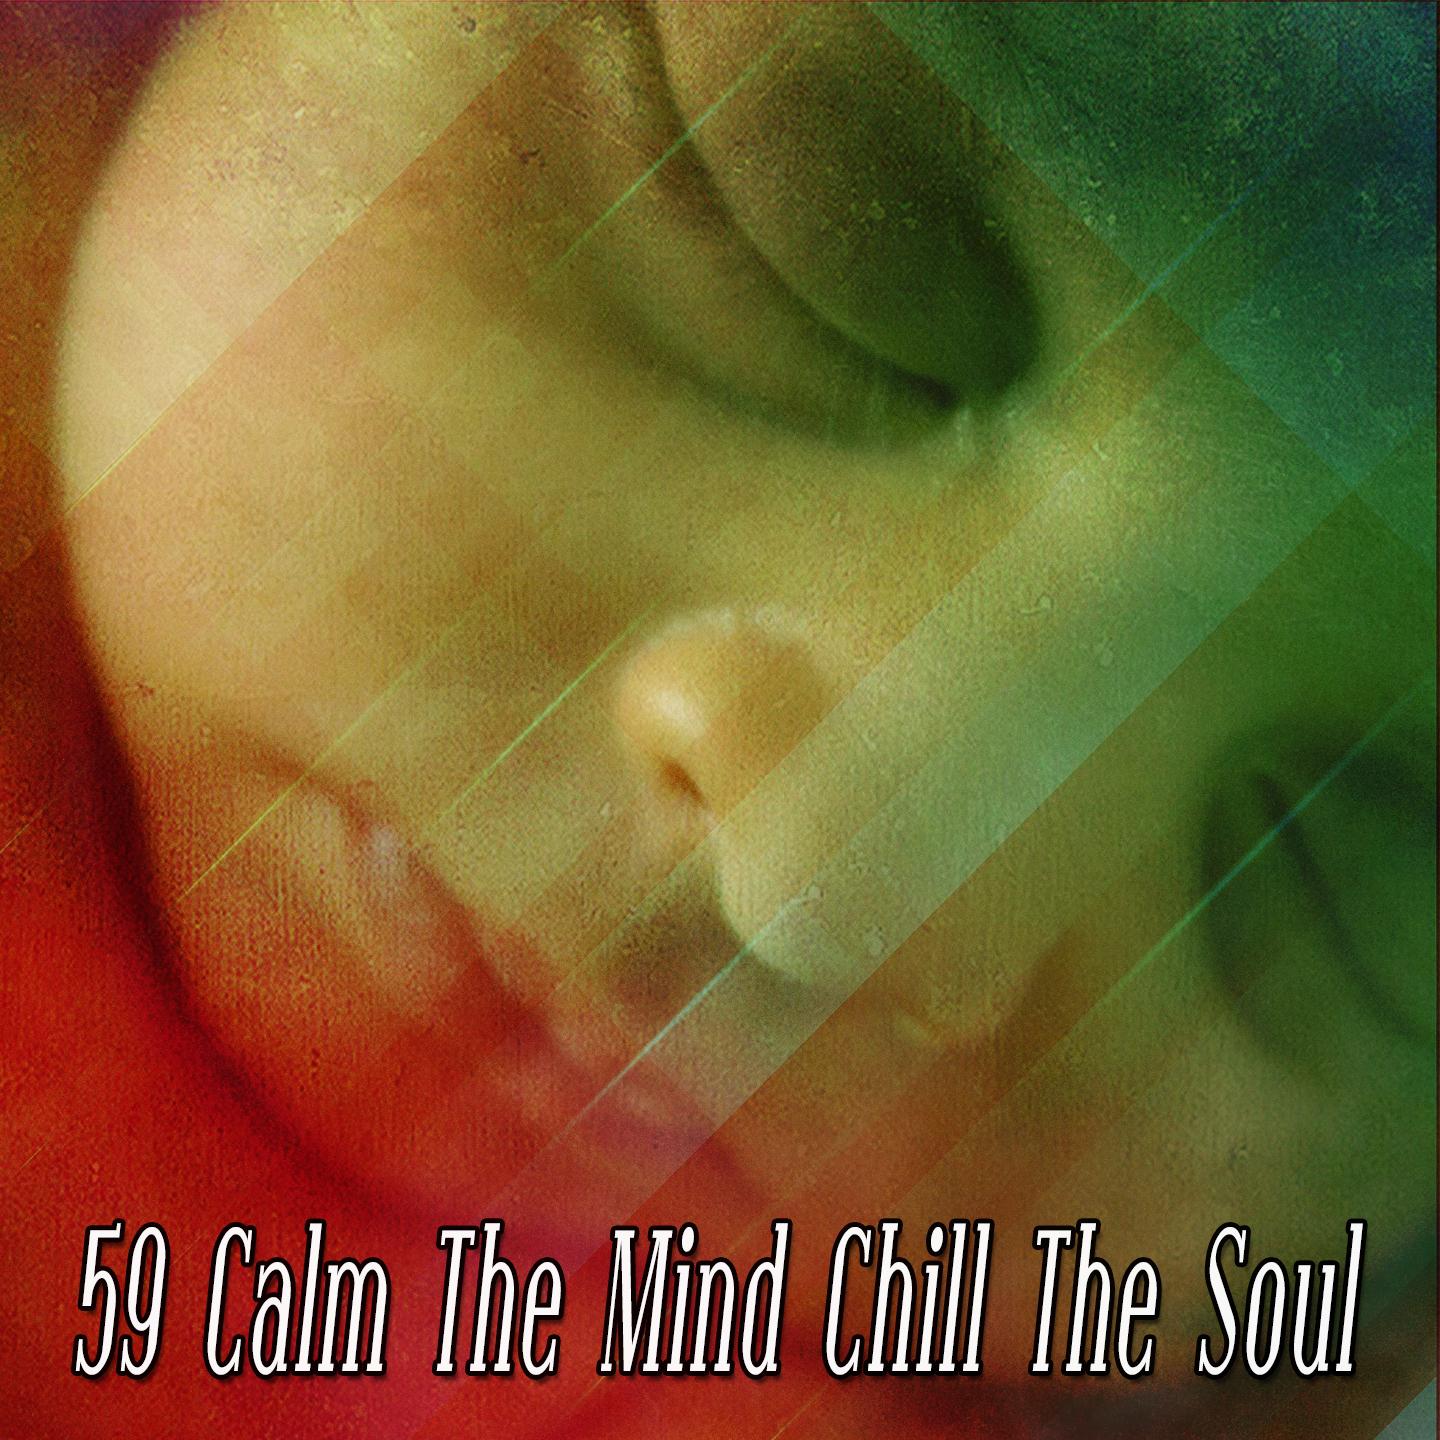 59 Calm The Mind Chill The Soul